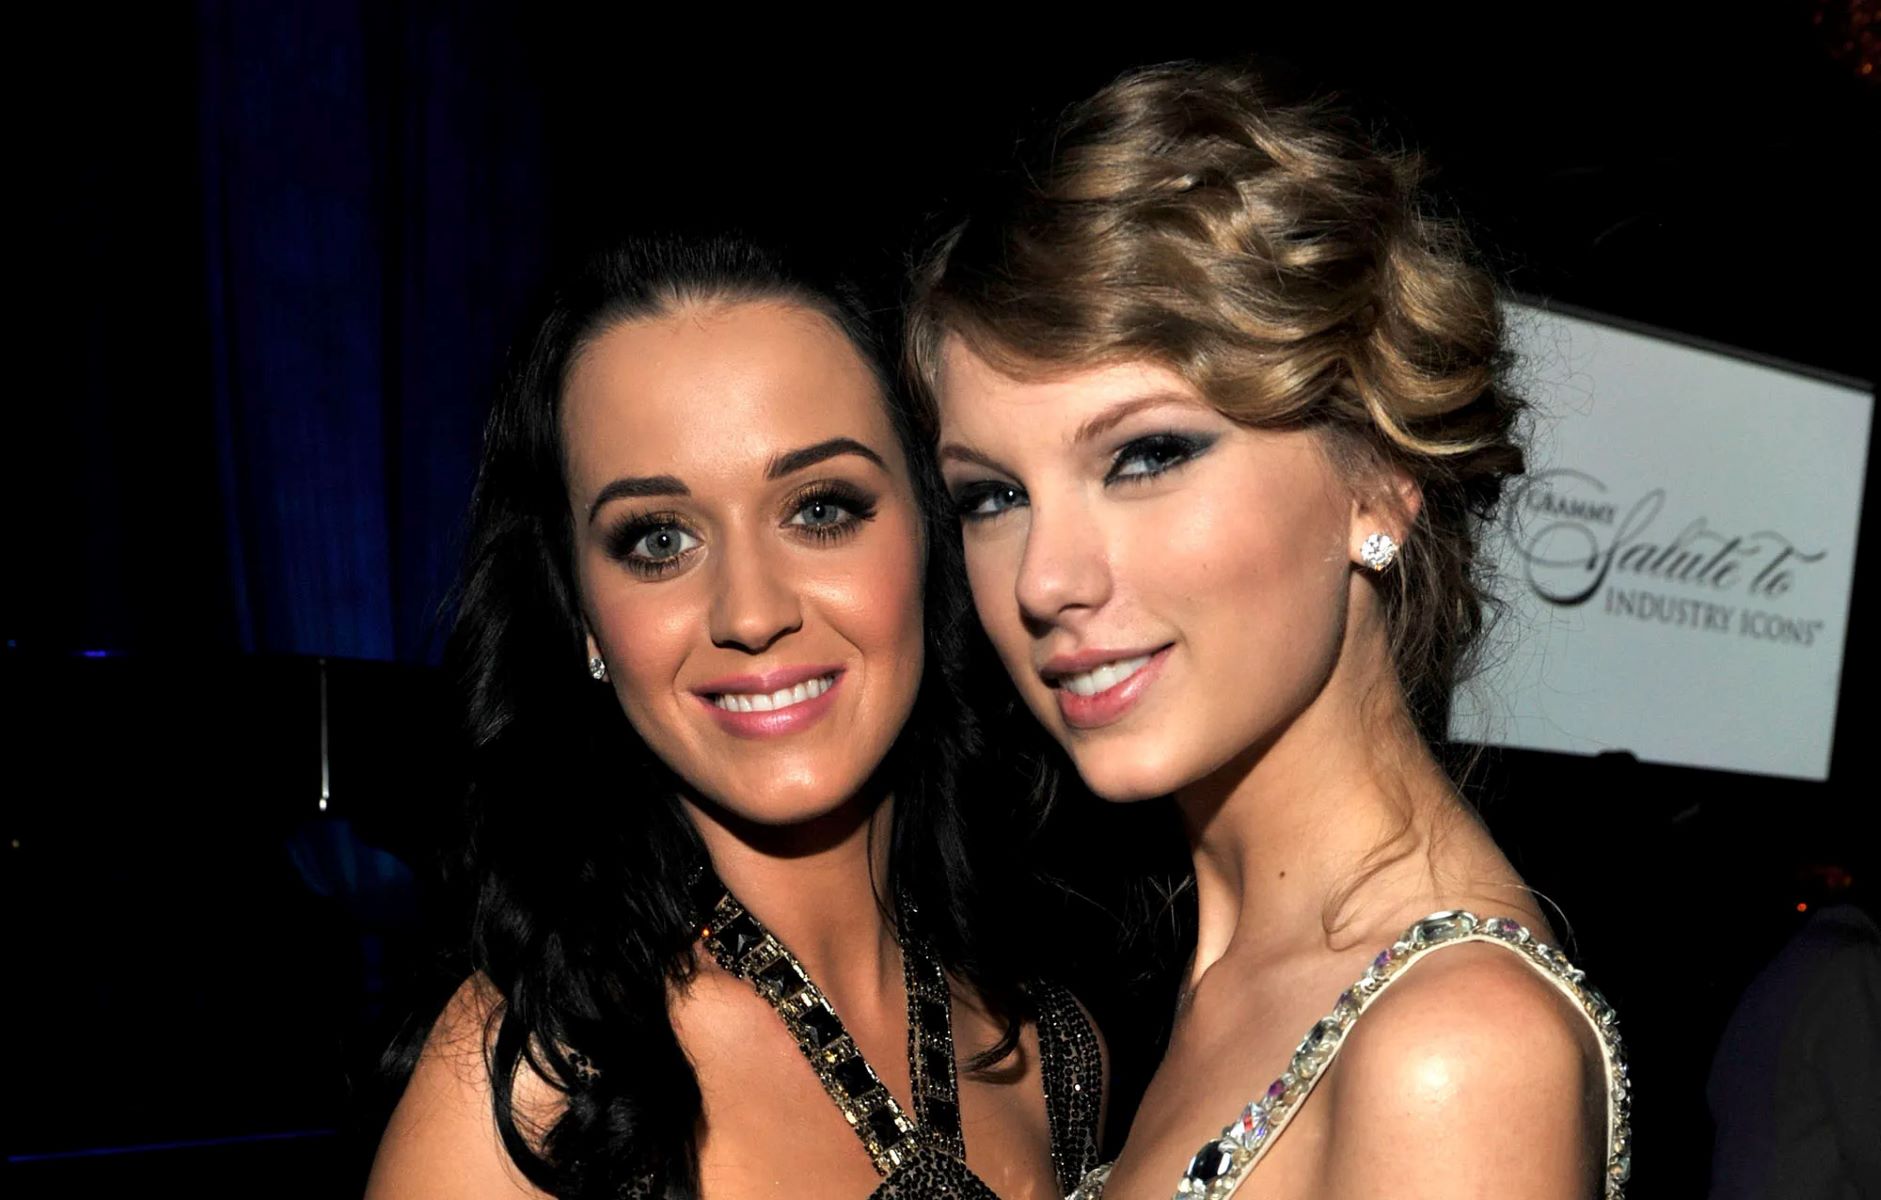 Shocking! Katy Perry And Taylor Swift's Bare-Faced Reveals Will Leave You Speechless!